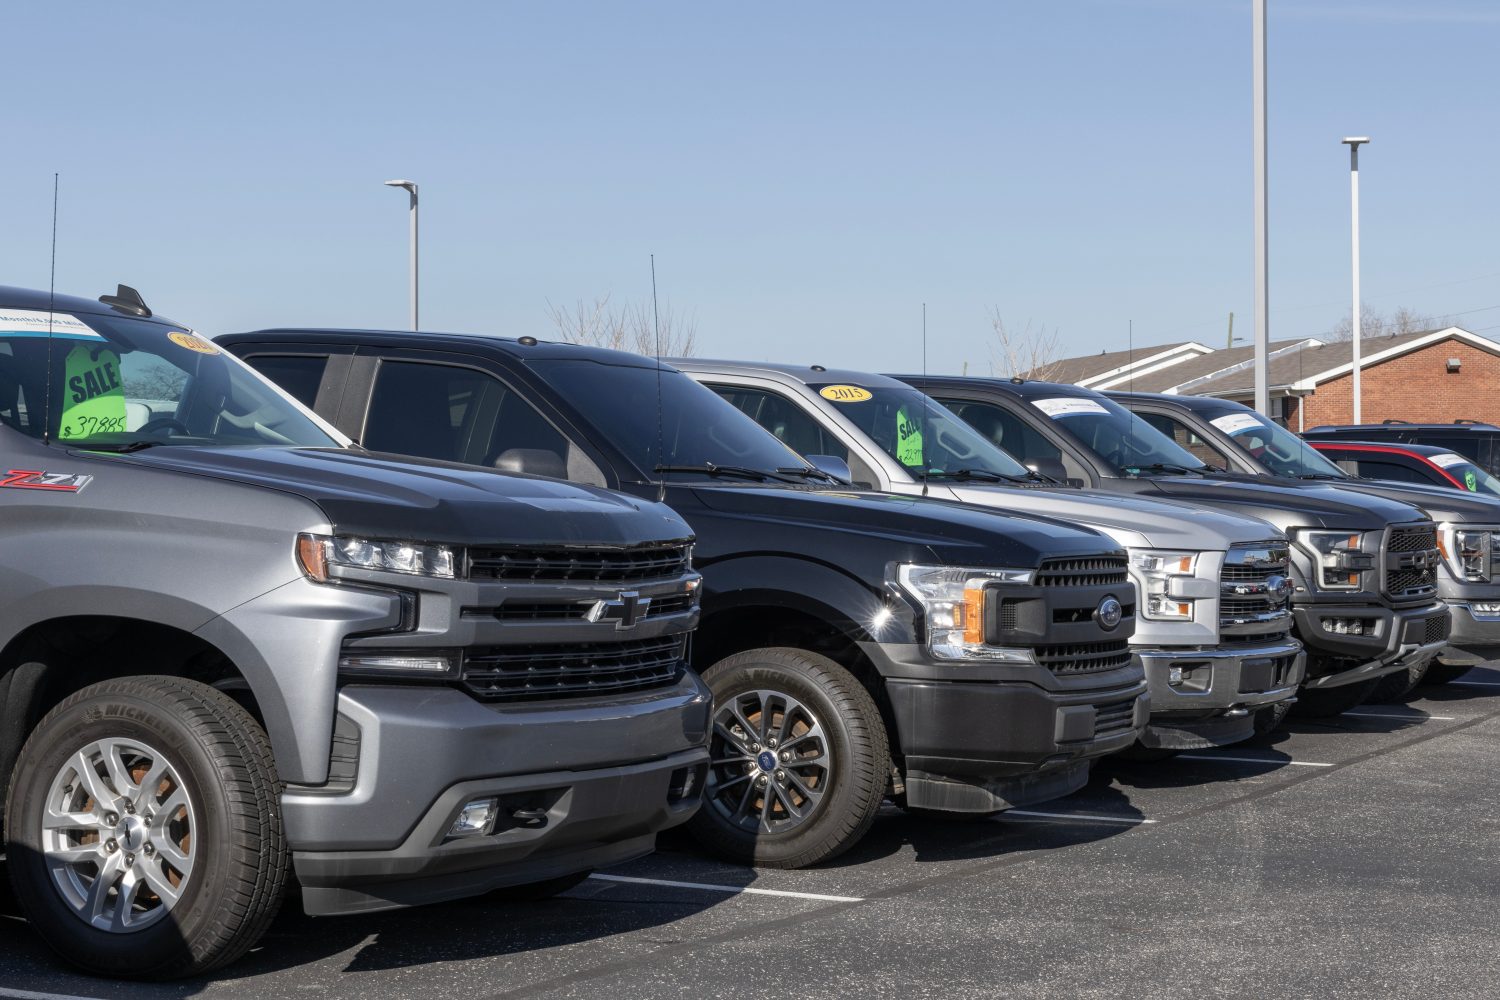 Retail used-vehicle sales in May saw a significant increase, marking the highest level this year, according to vAuto data.